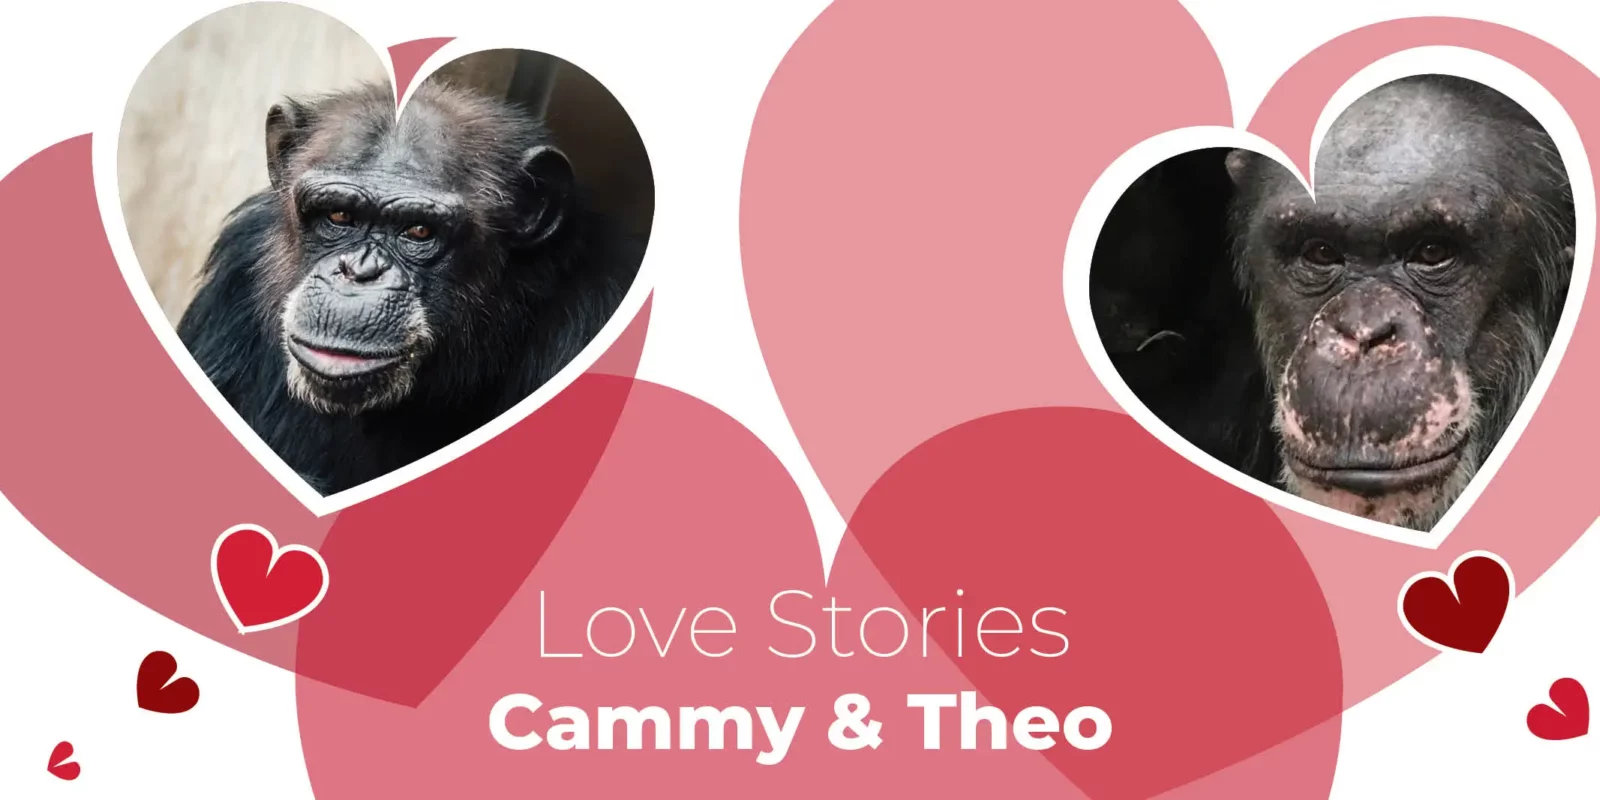 Love Stories: Cammy & Theo